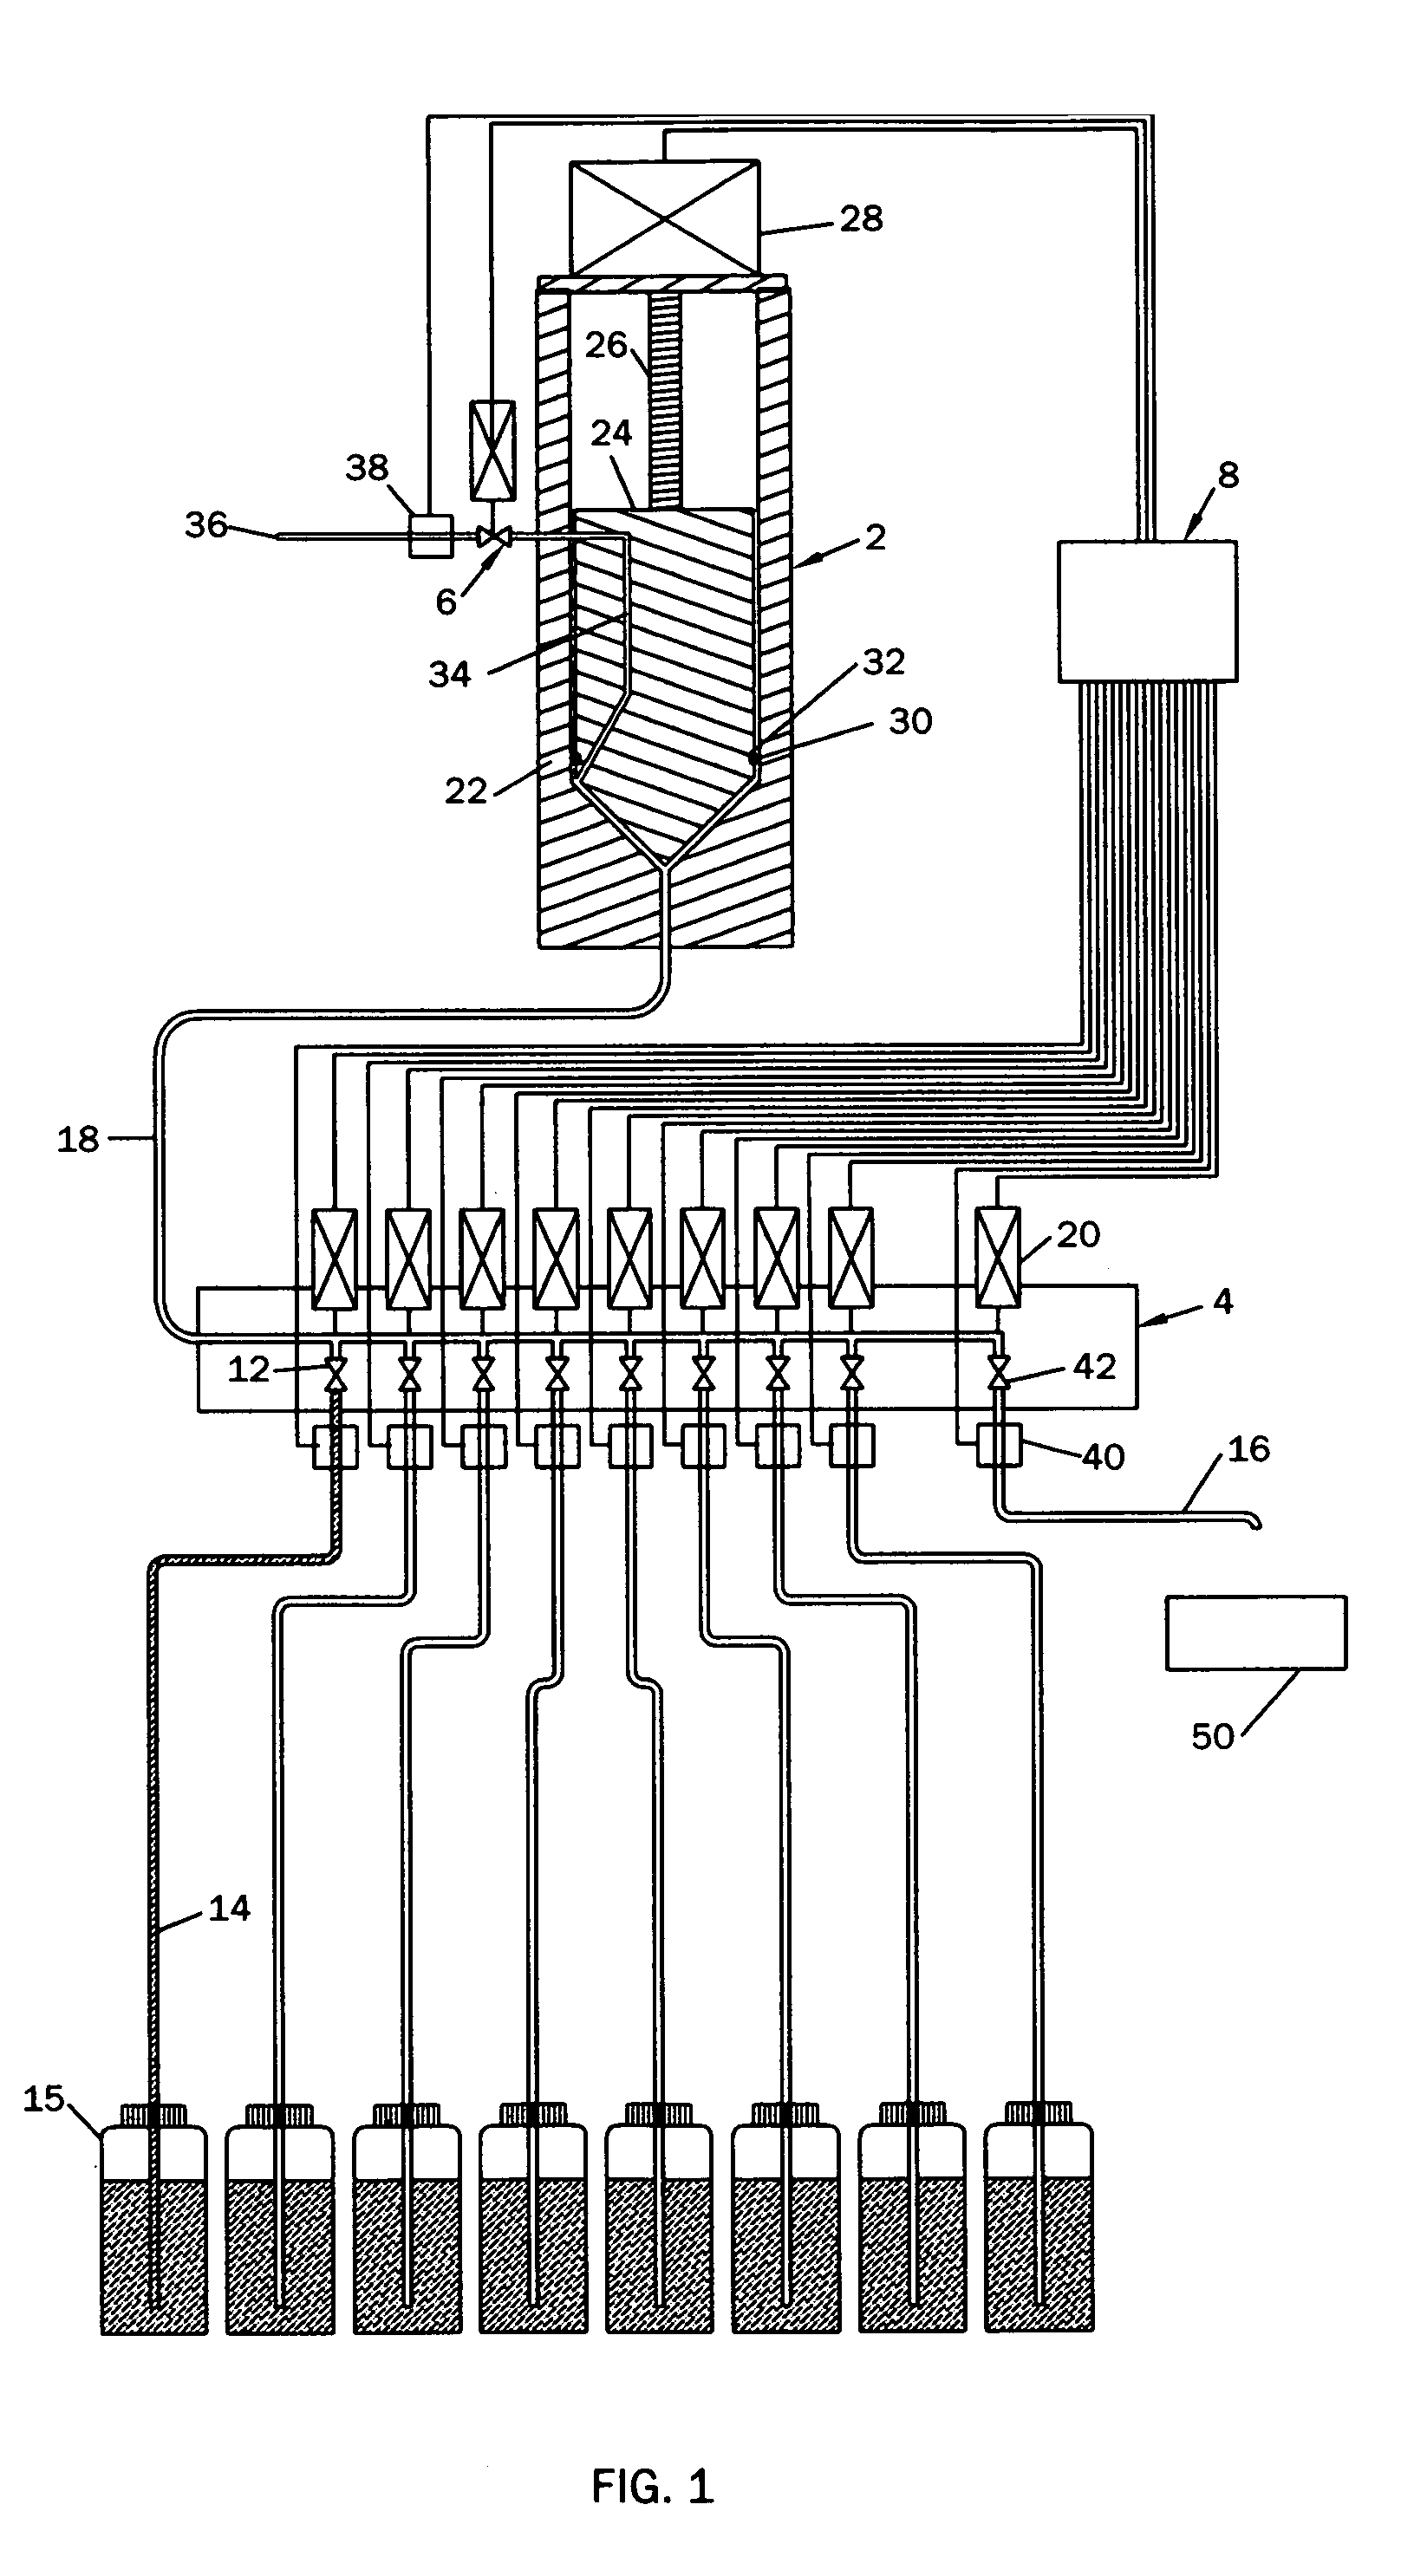 Device and method for the volumetric measurement and dispensing of liquids